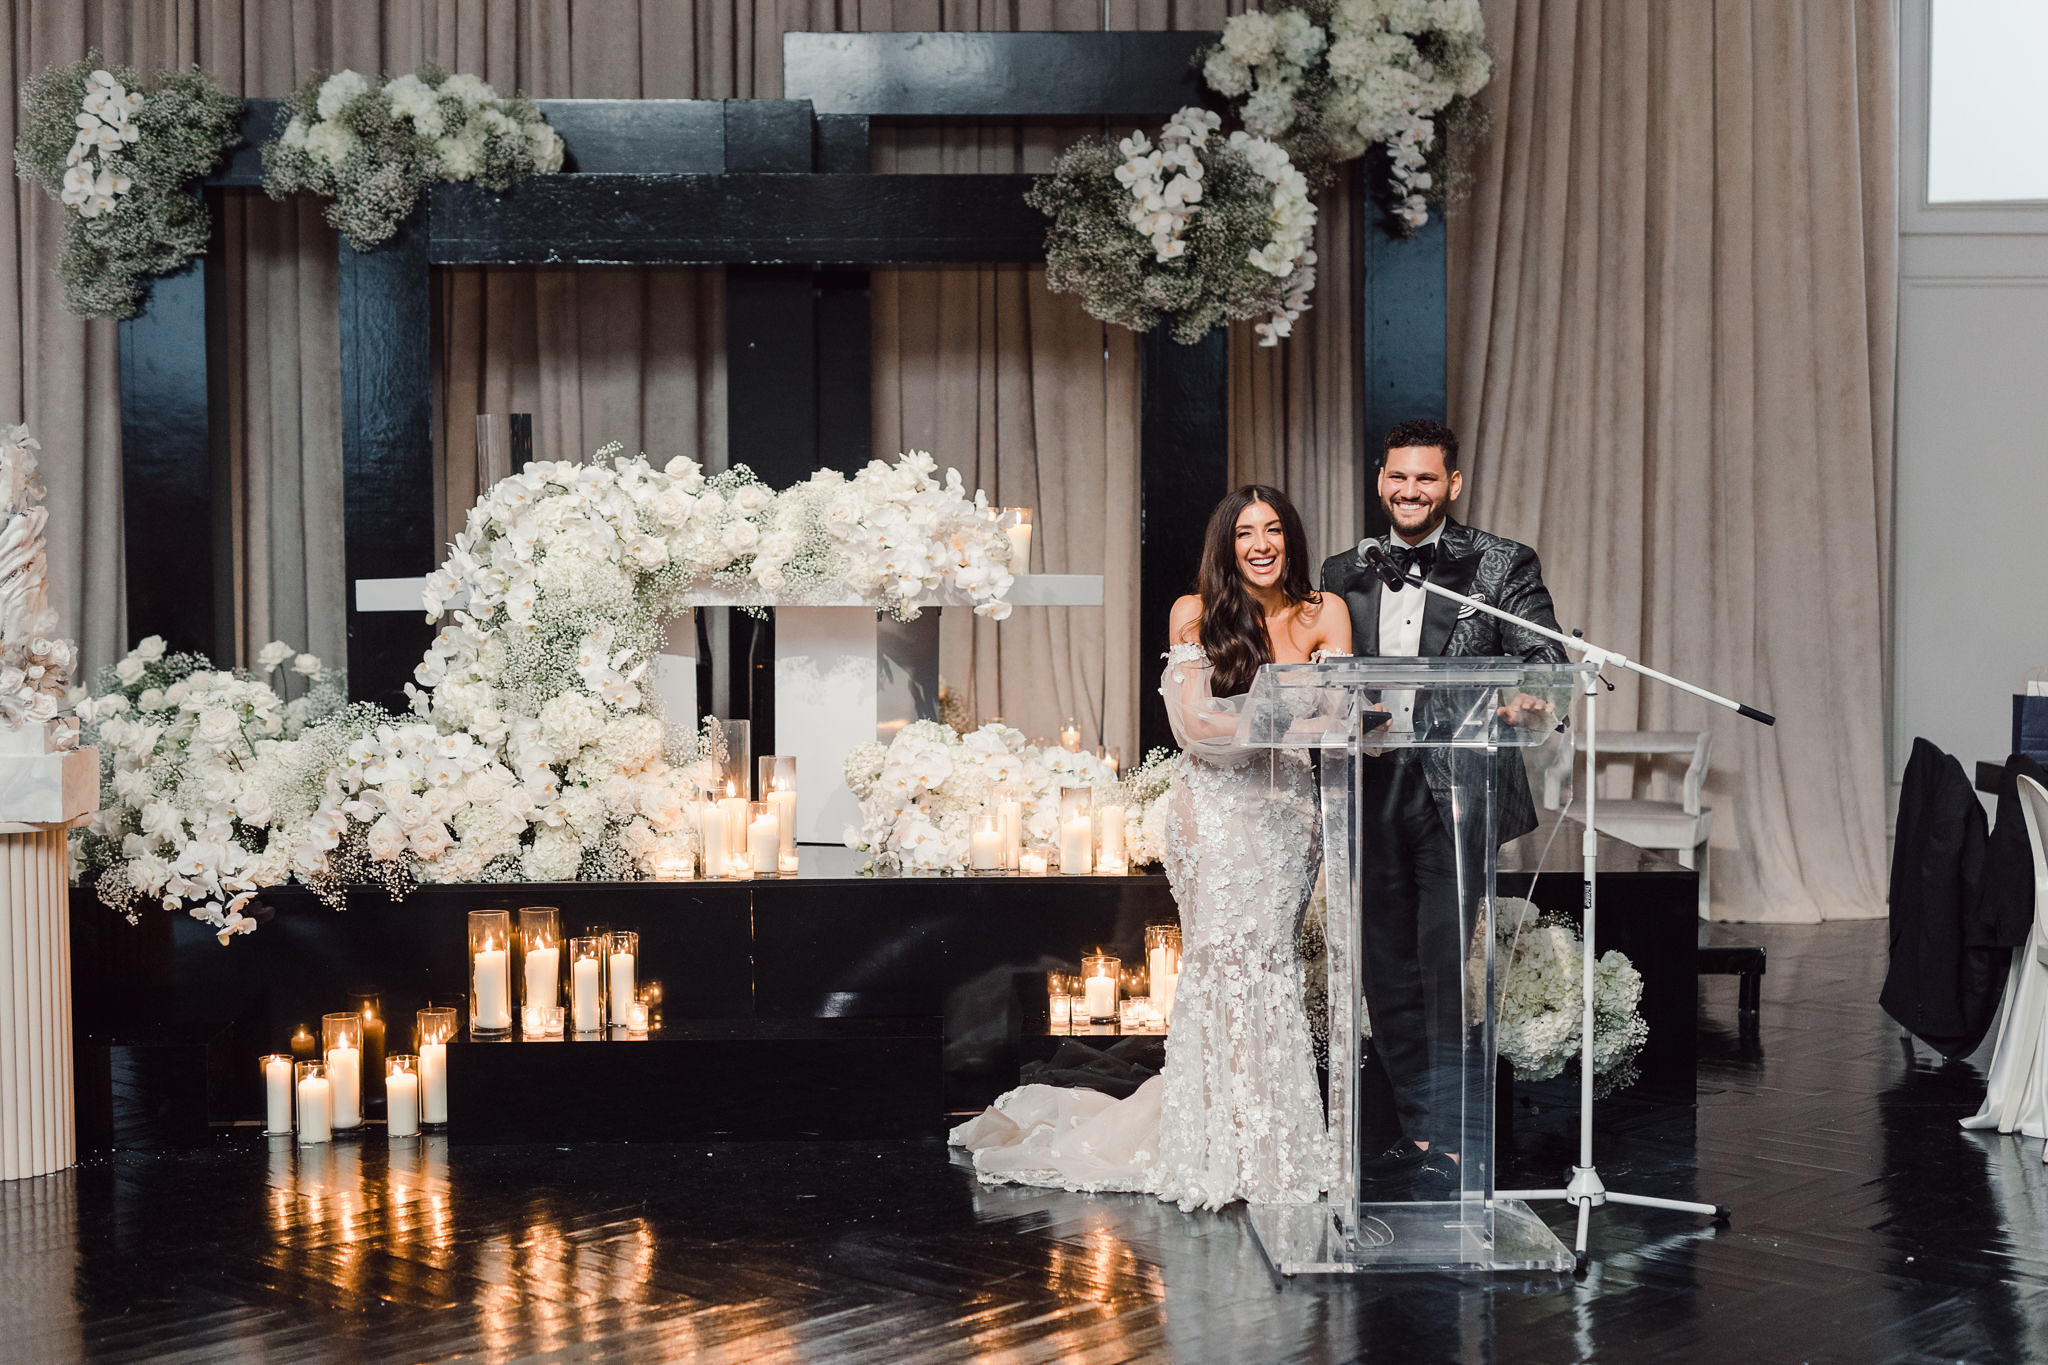 A reception speech with a bride and groom standing at a podium in front of candles and floral arrangements.